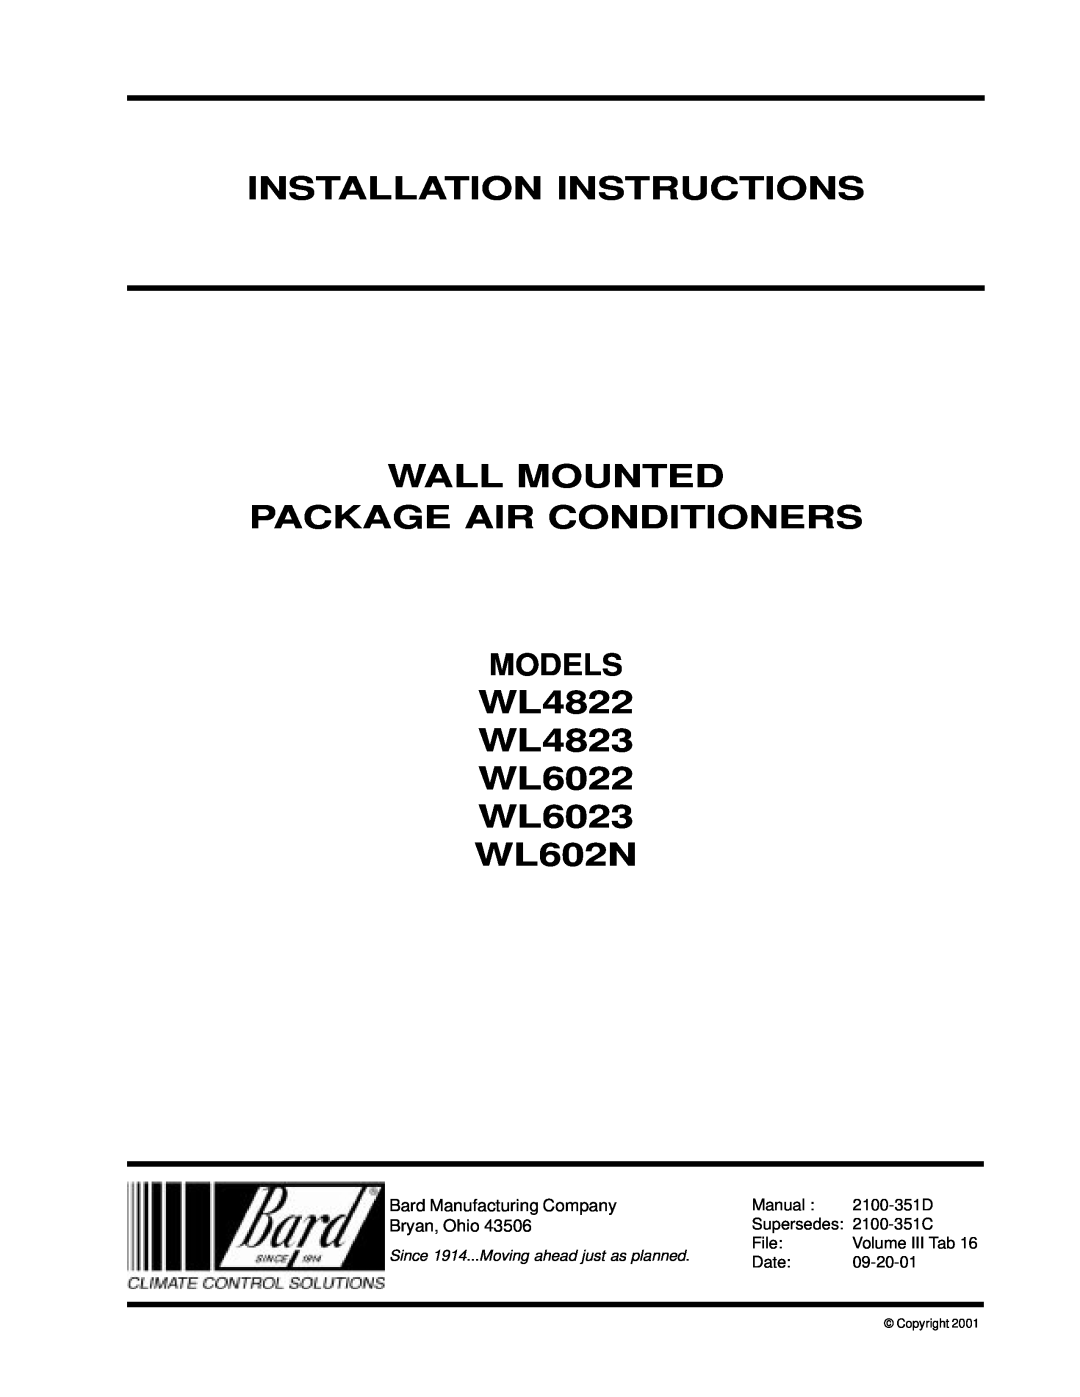 Bard WL4822, WL602N installation instructions Installation Instructions Wall Mounted Package Air Conditioners, Models 